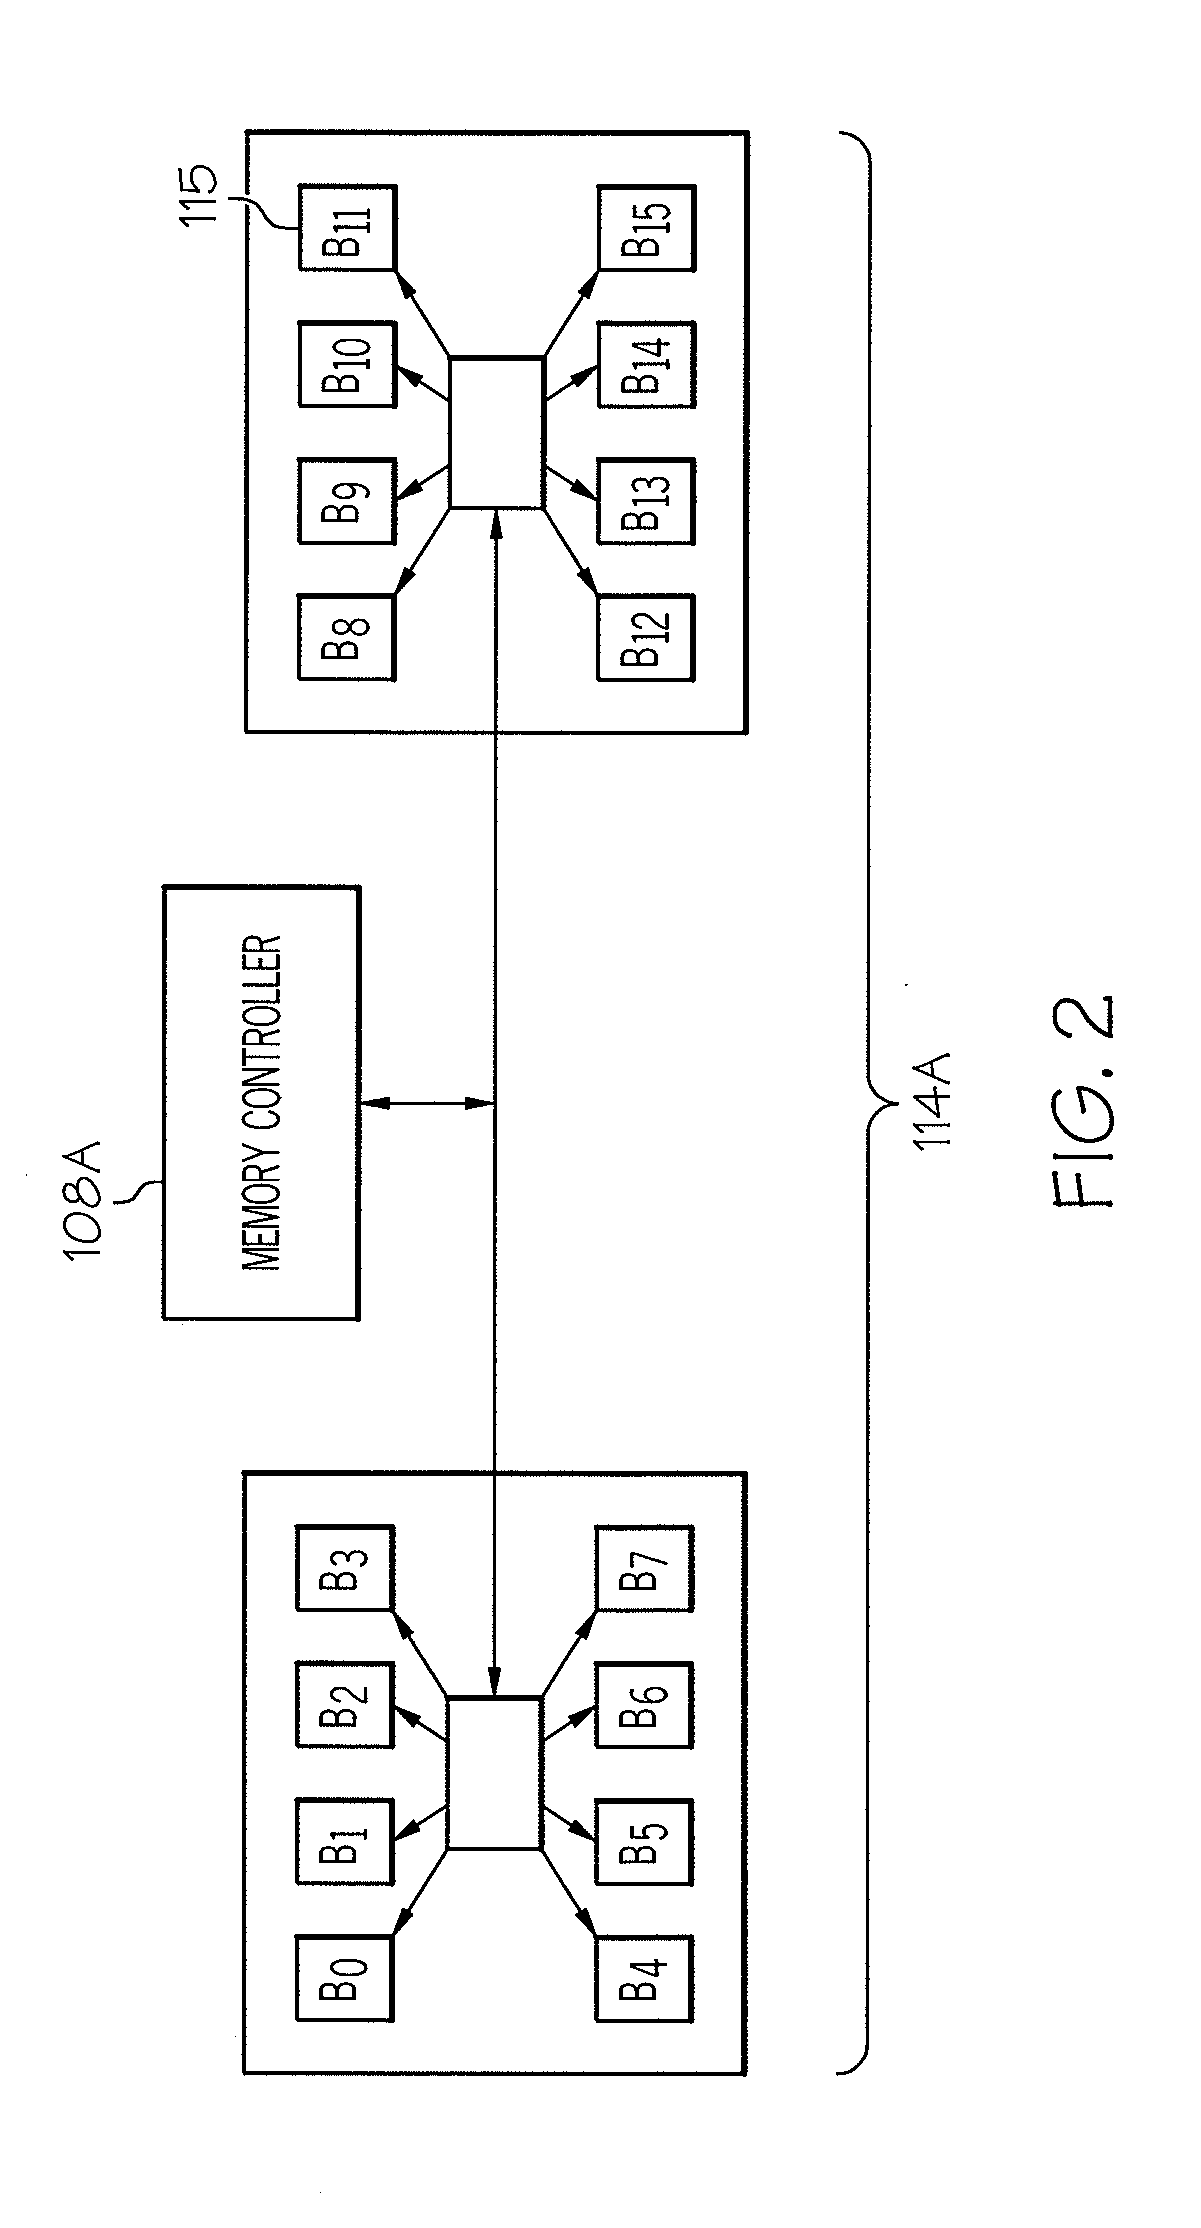 System and method for handling data requests